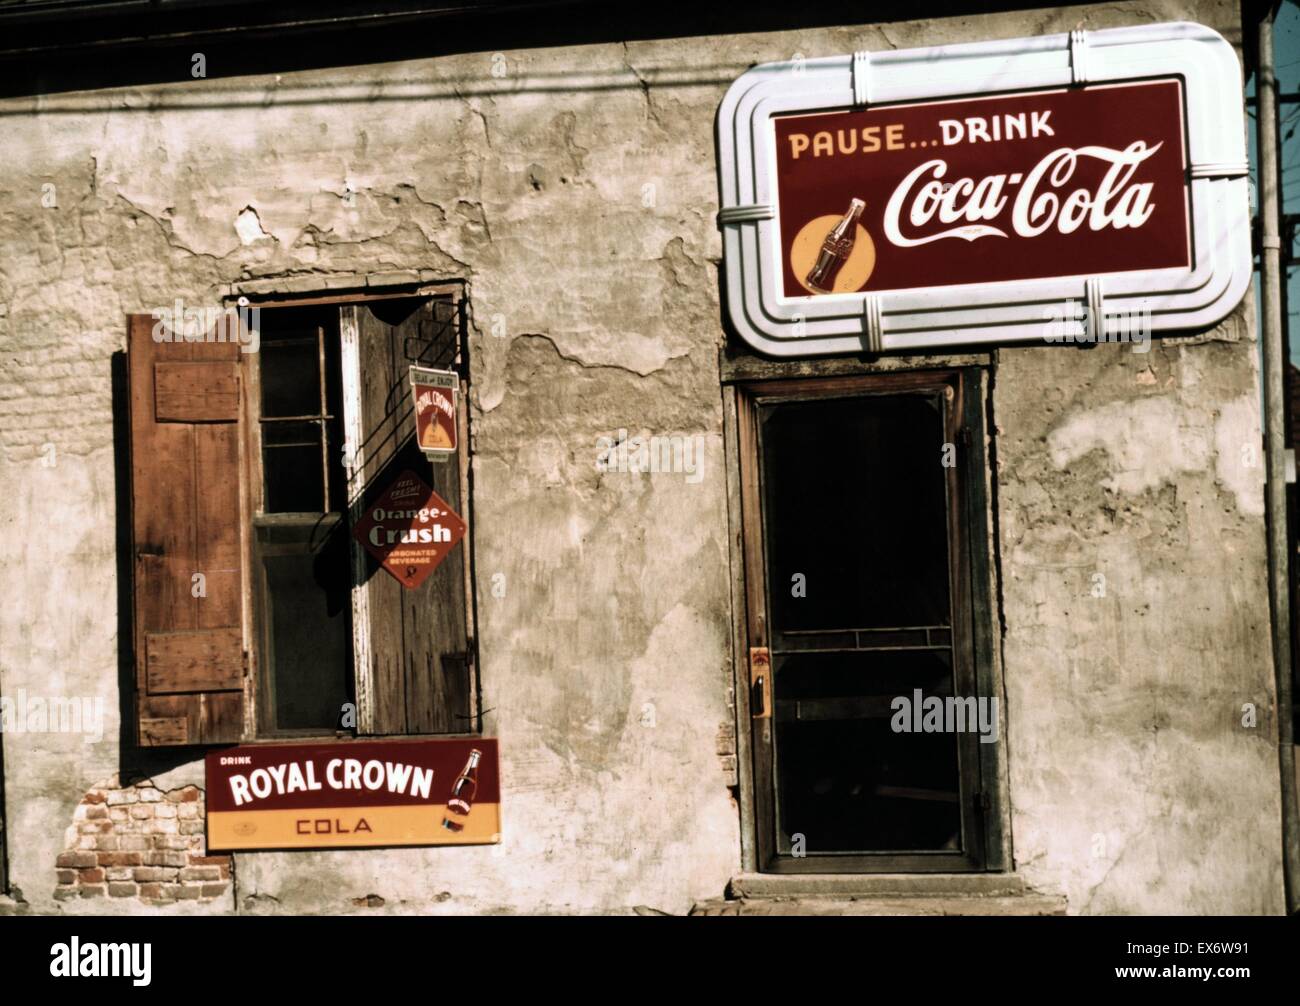 Miss Natchez' by photographer Marion Post Wolcott (1910-1990) August 1940. Photograph shows store or café with soft drinks sign. Colour. Stock Photo